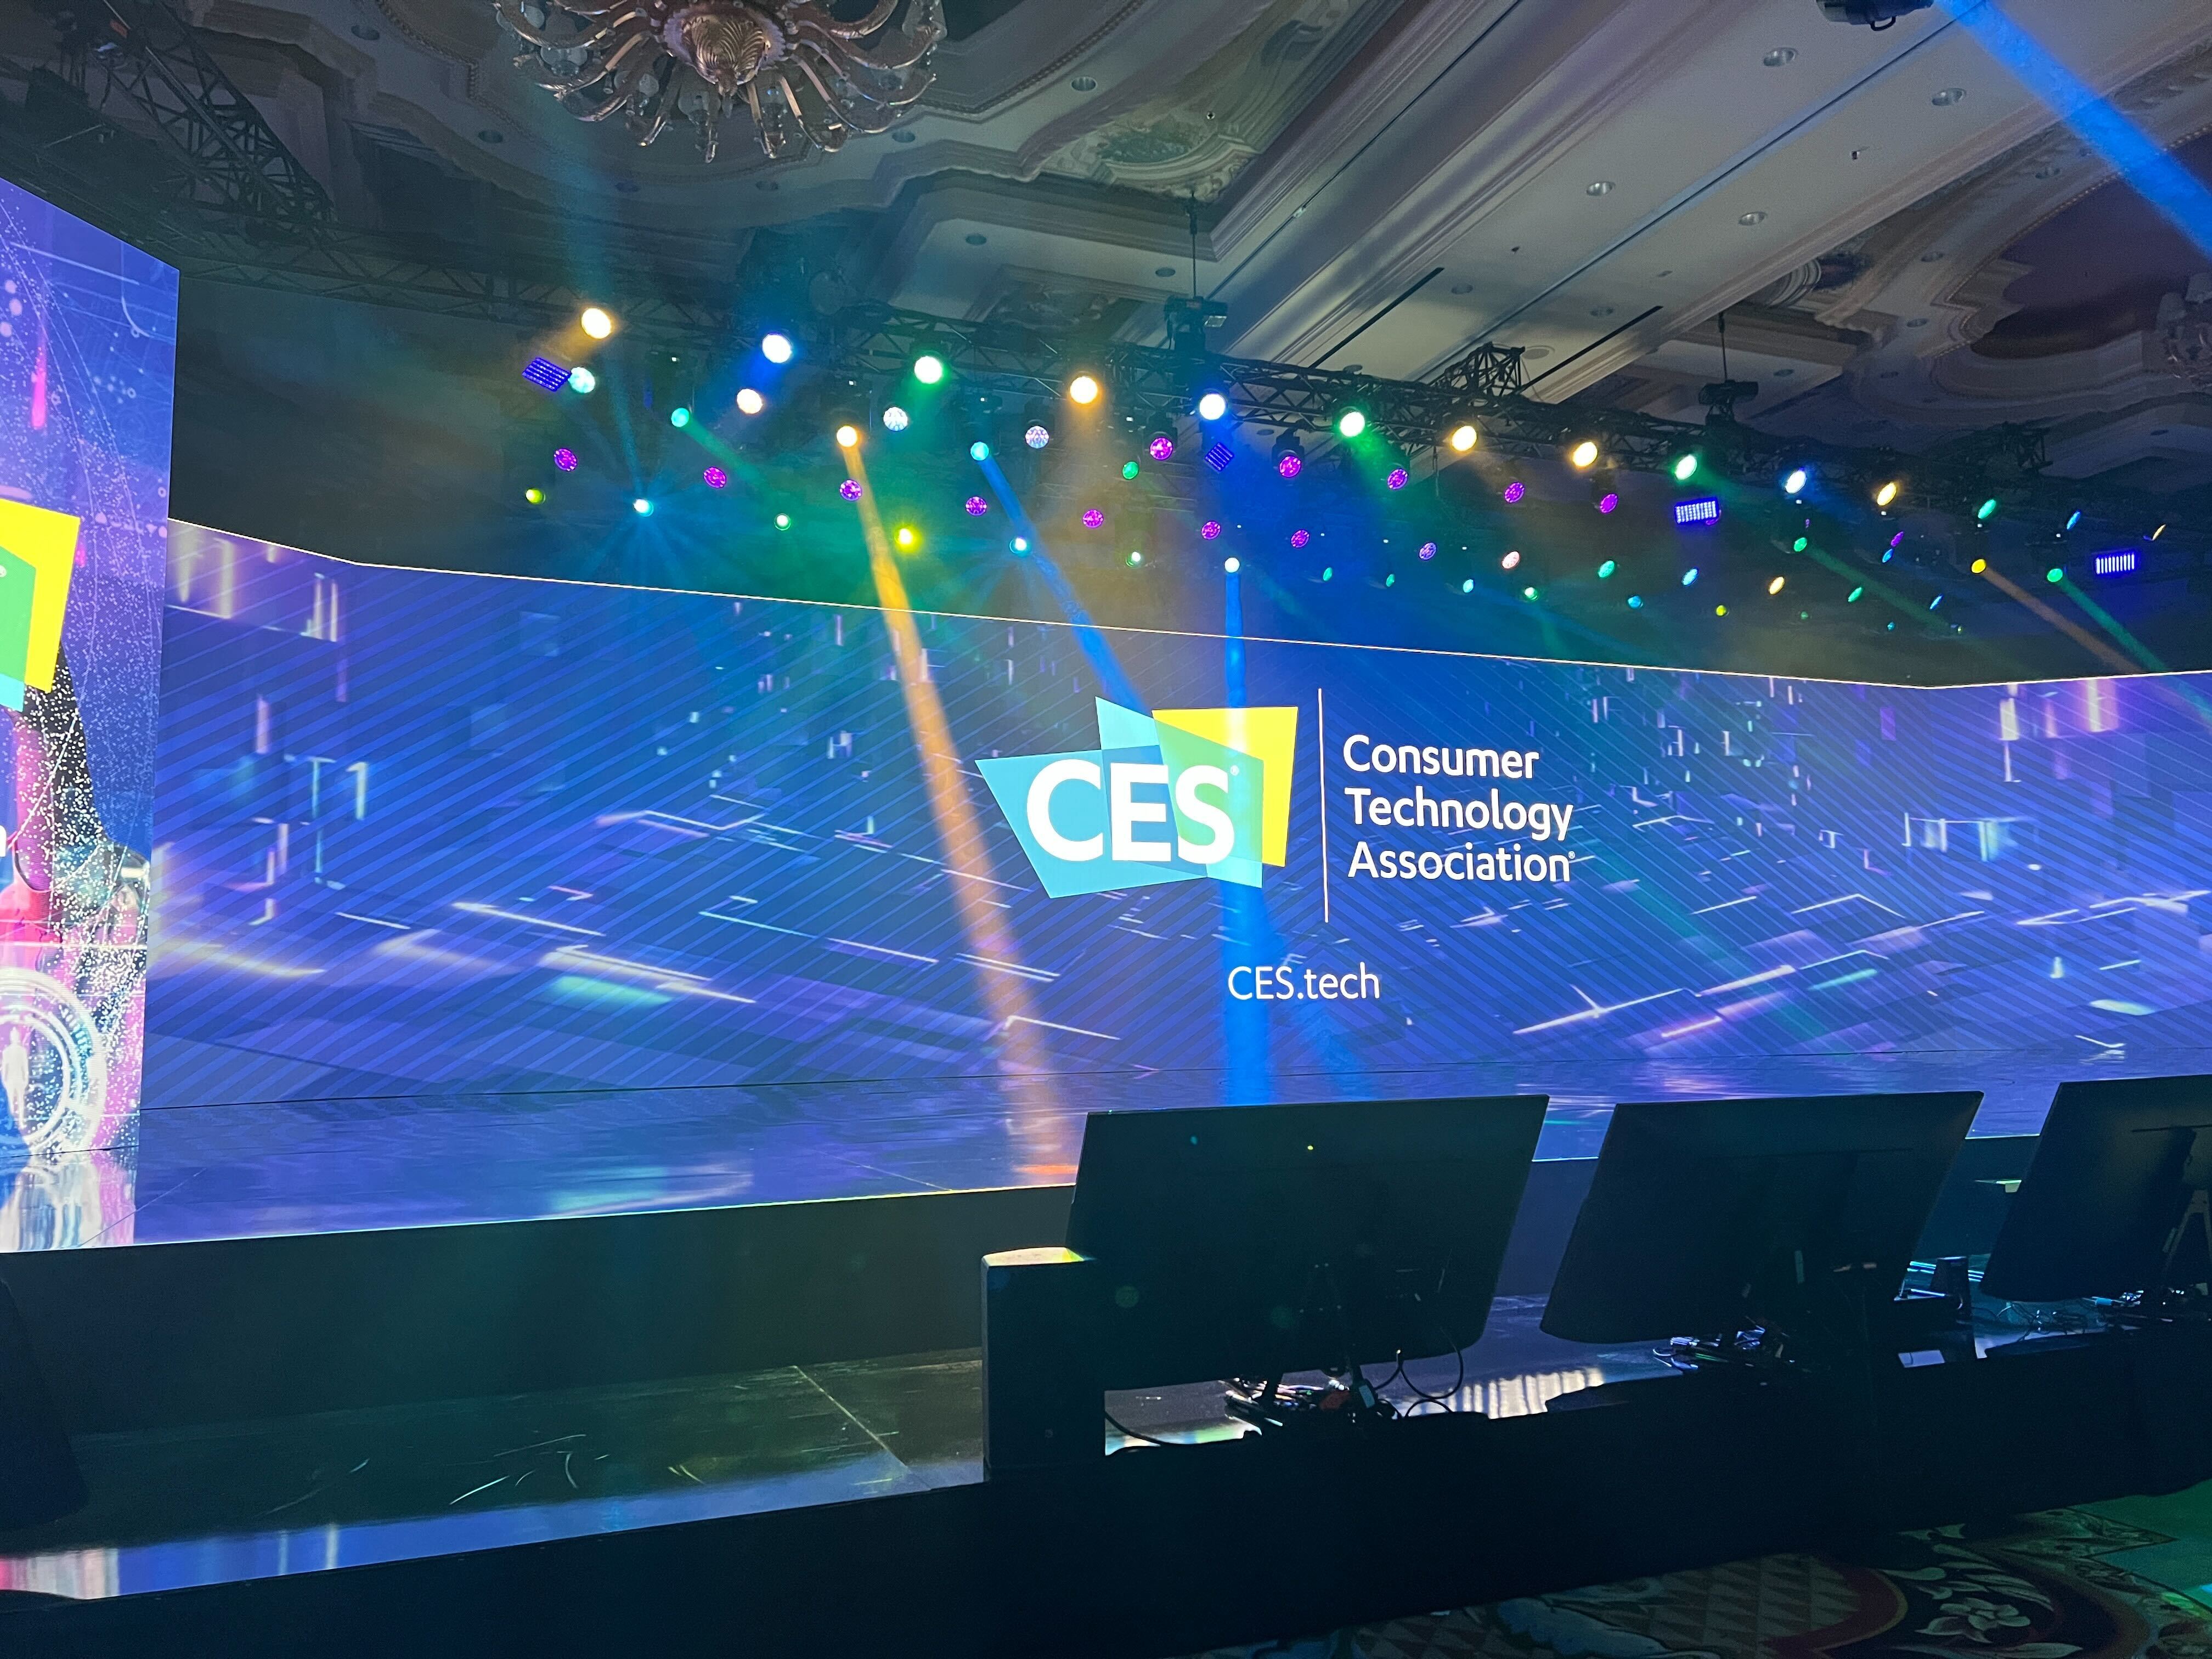 Scenes from AMD's CES 2023 Keynote